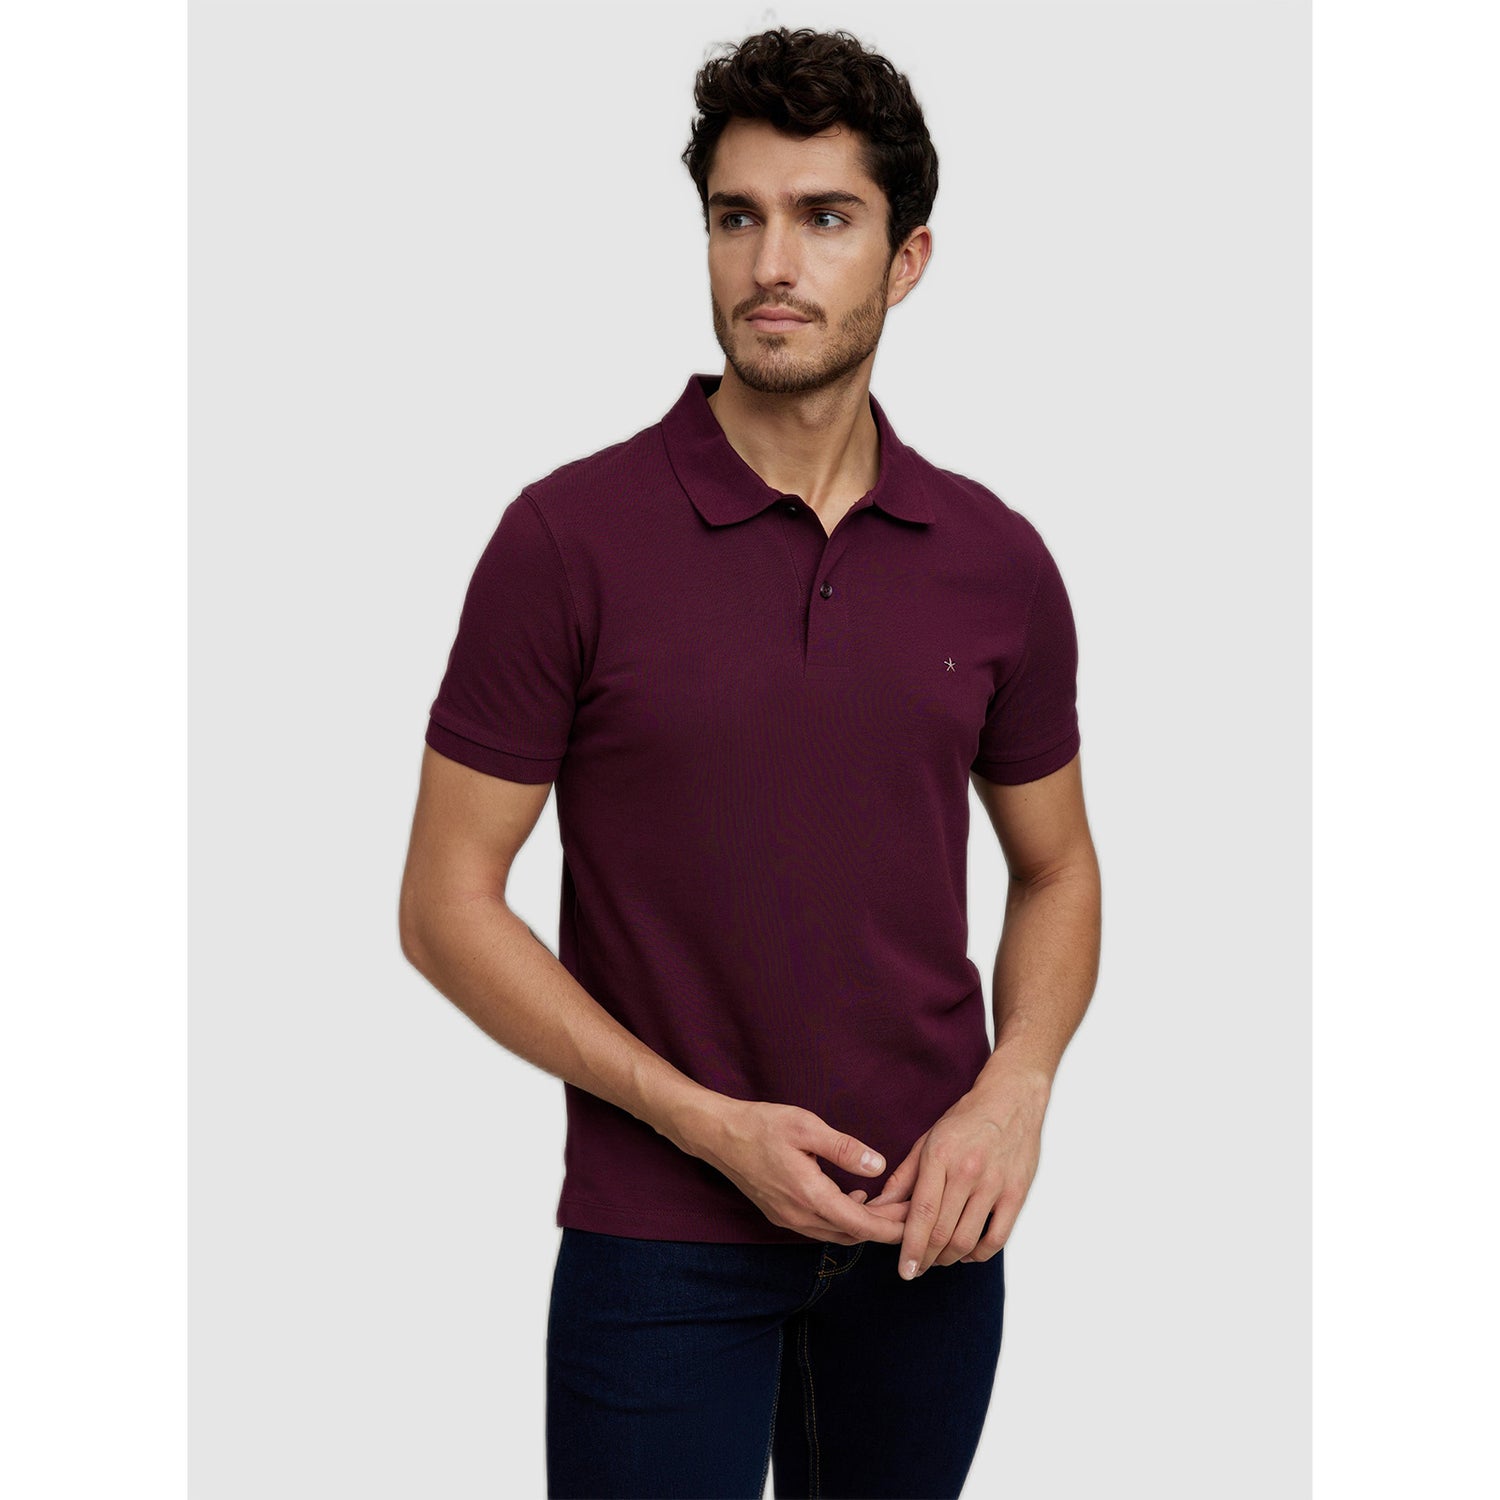 Men's Burgundy Solid Polo T-Shirts (Various Sizes)